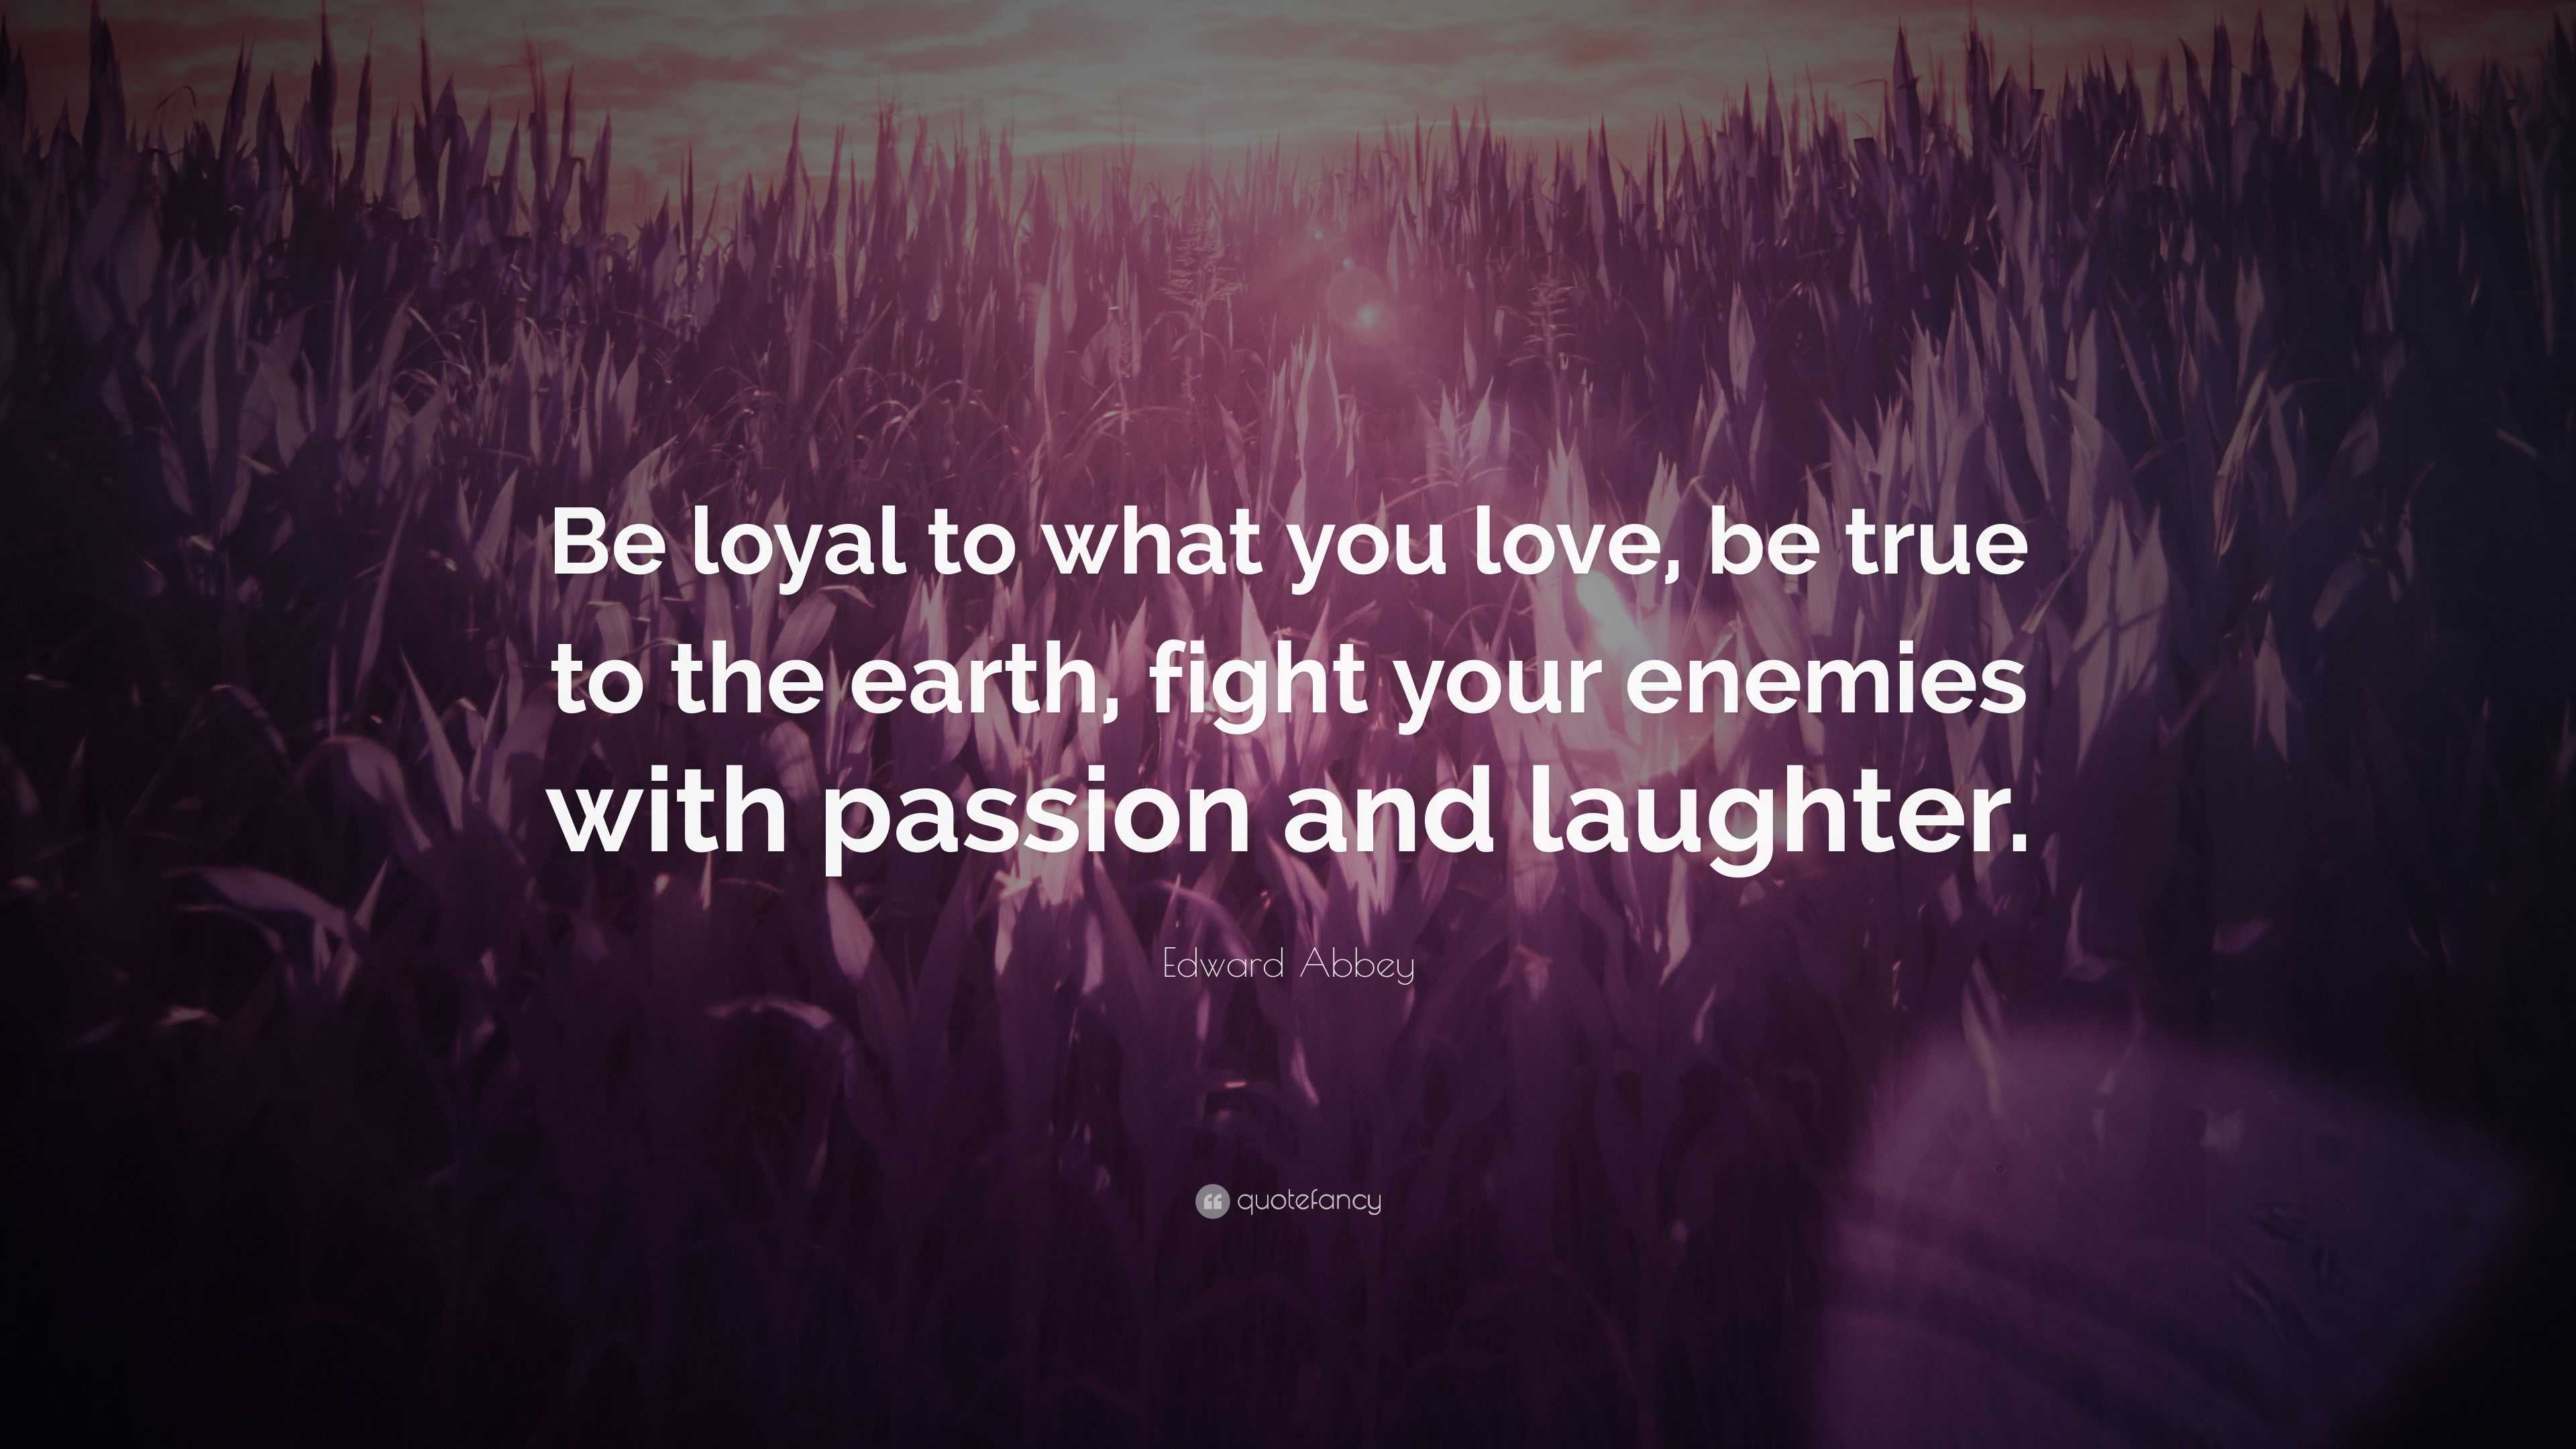 Edward Abbey Quote “Be loyal to what you love be true to the